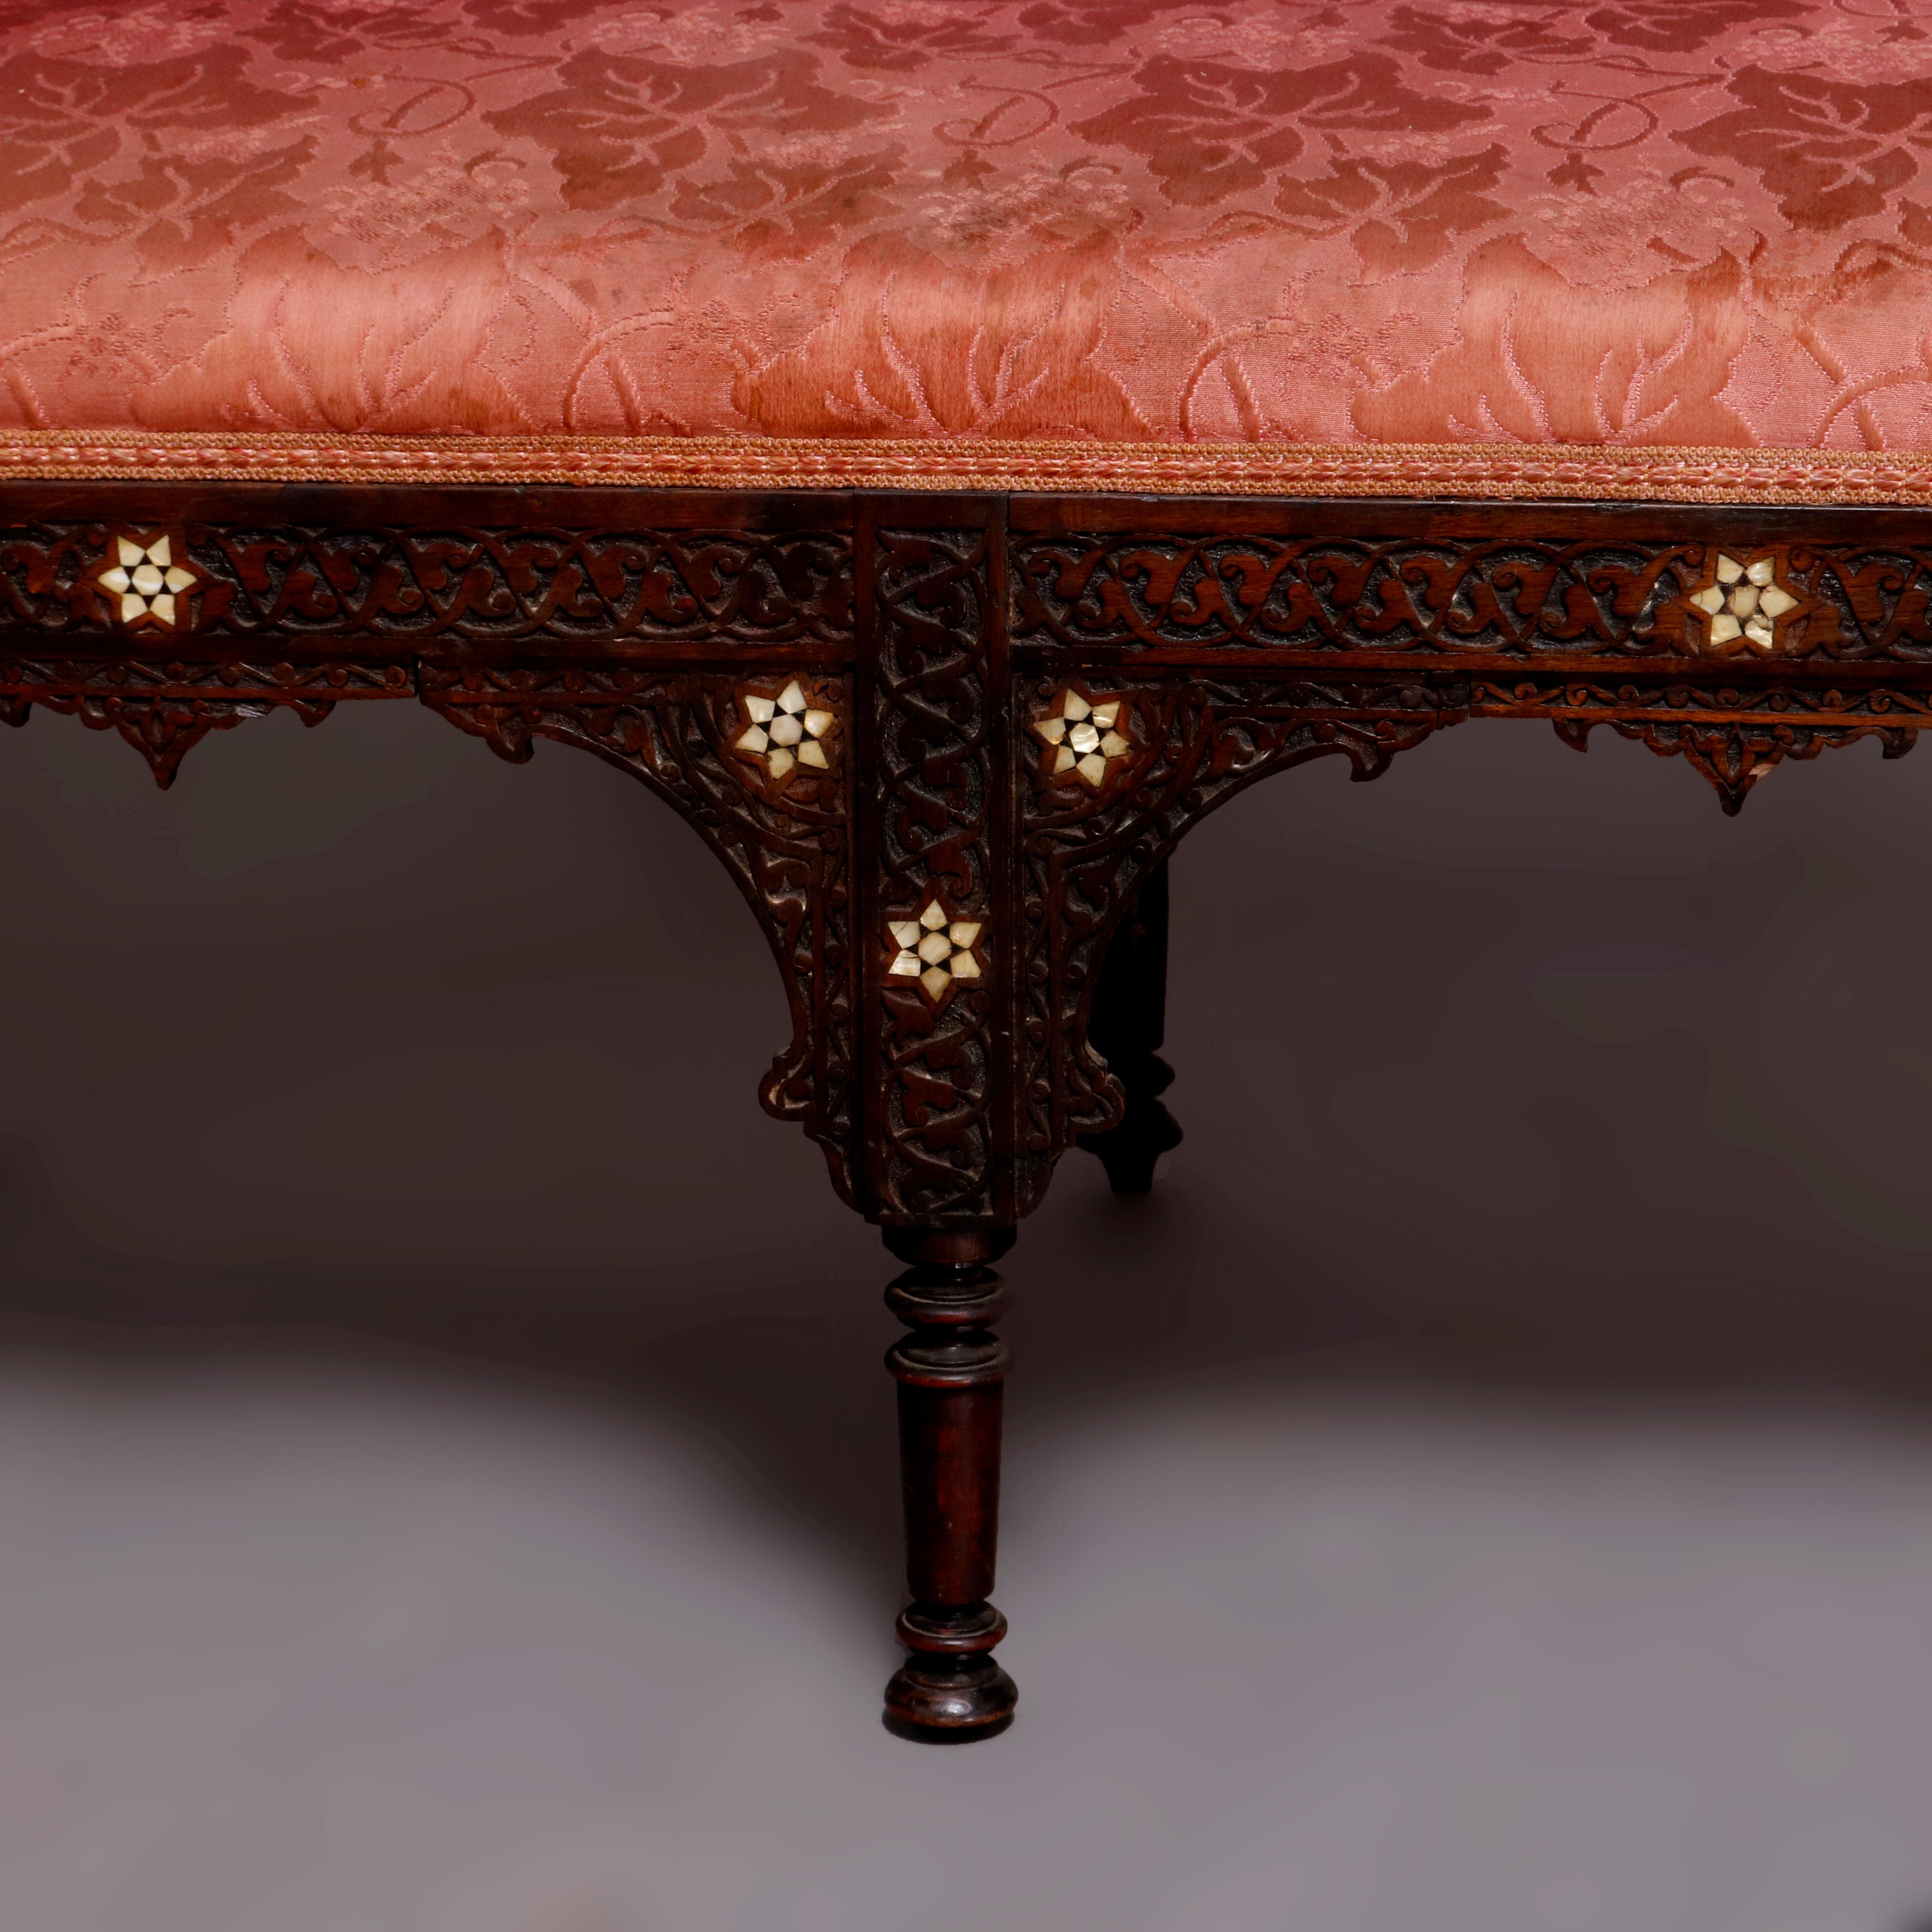 Syrian Orientalist Mother of Pearl Inlaid & Carved Hardwood Settee 19th Century 5